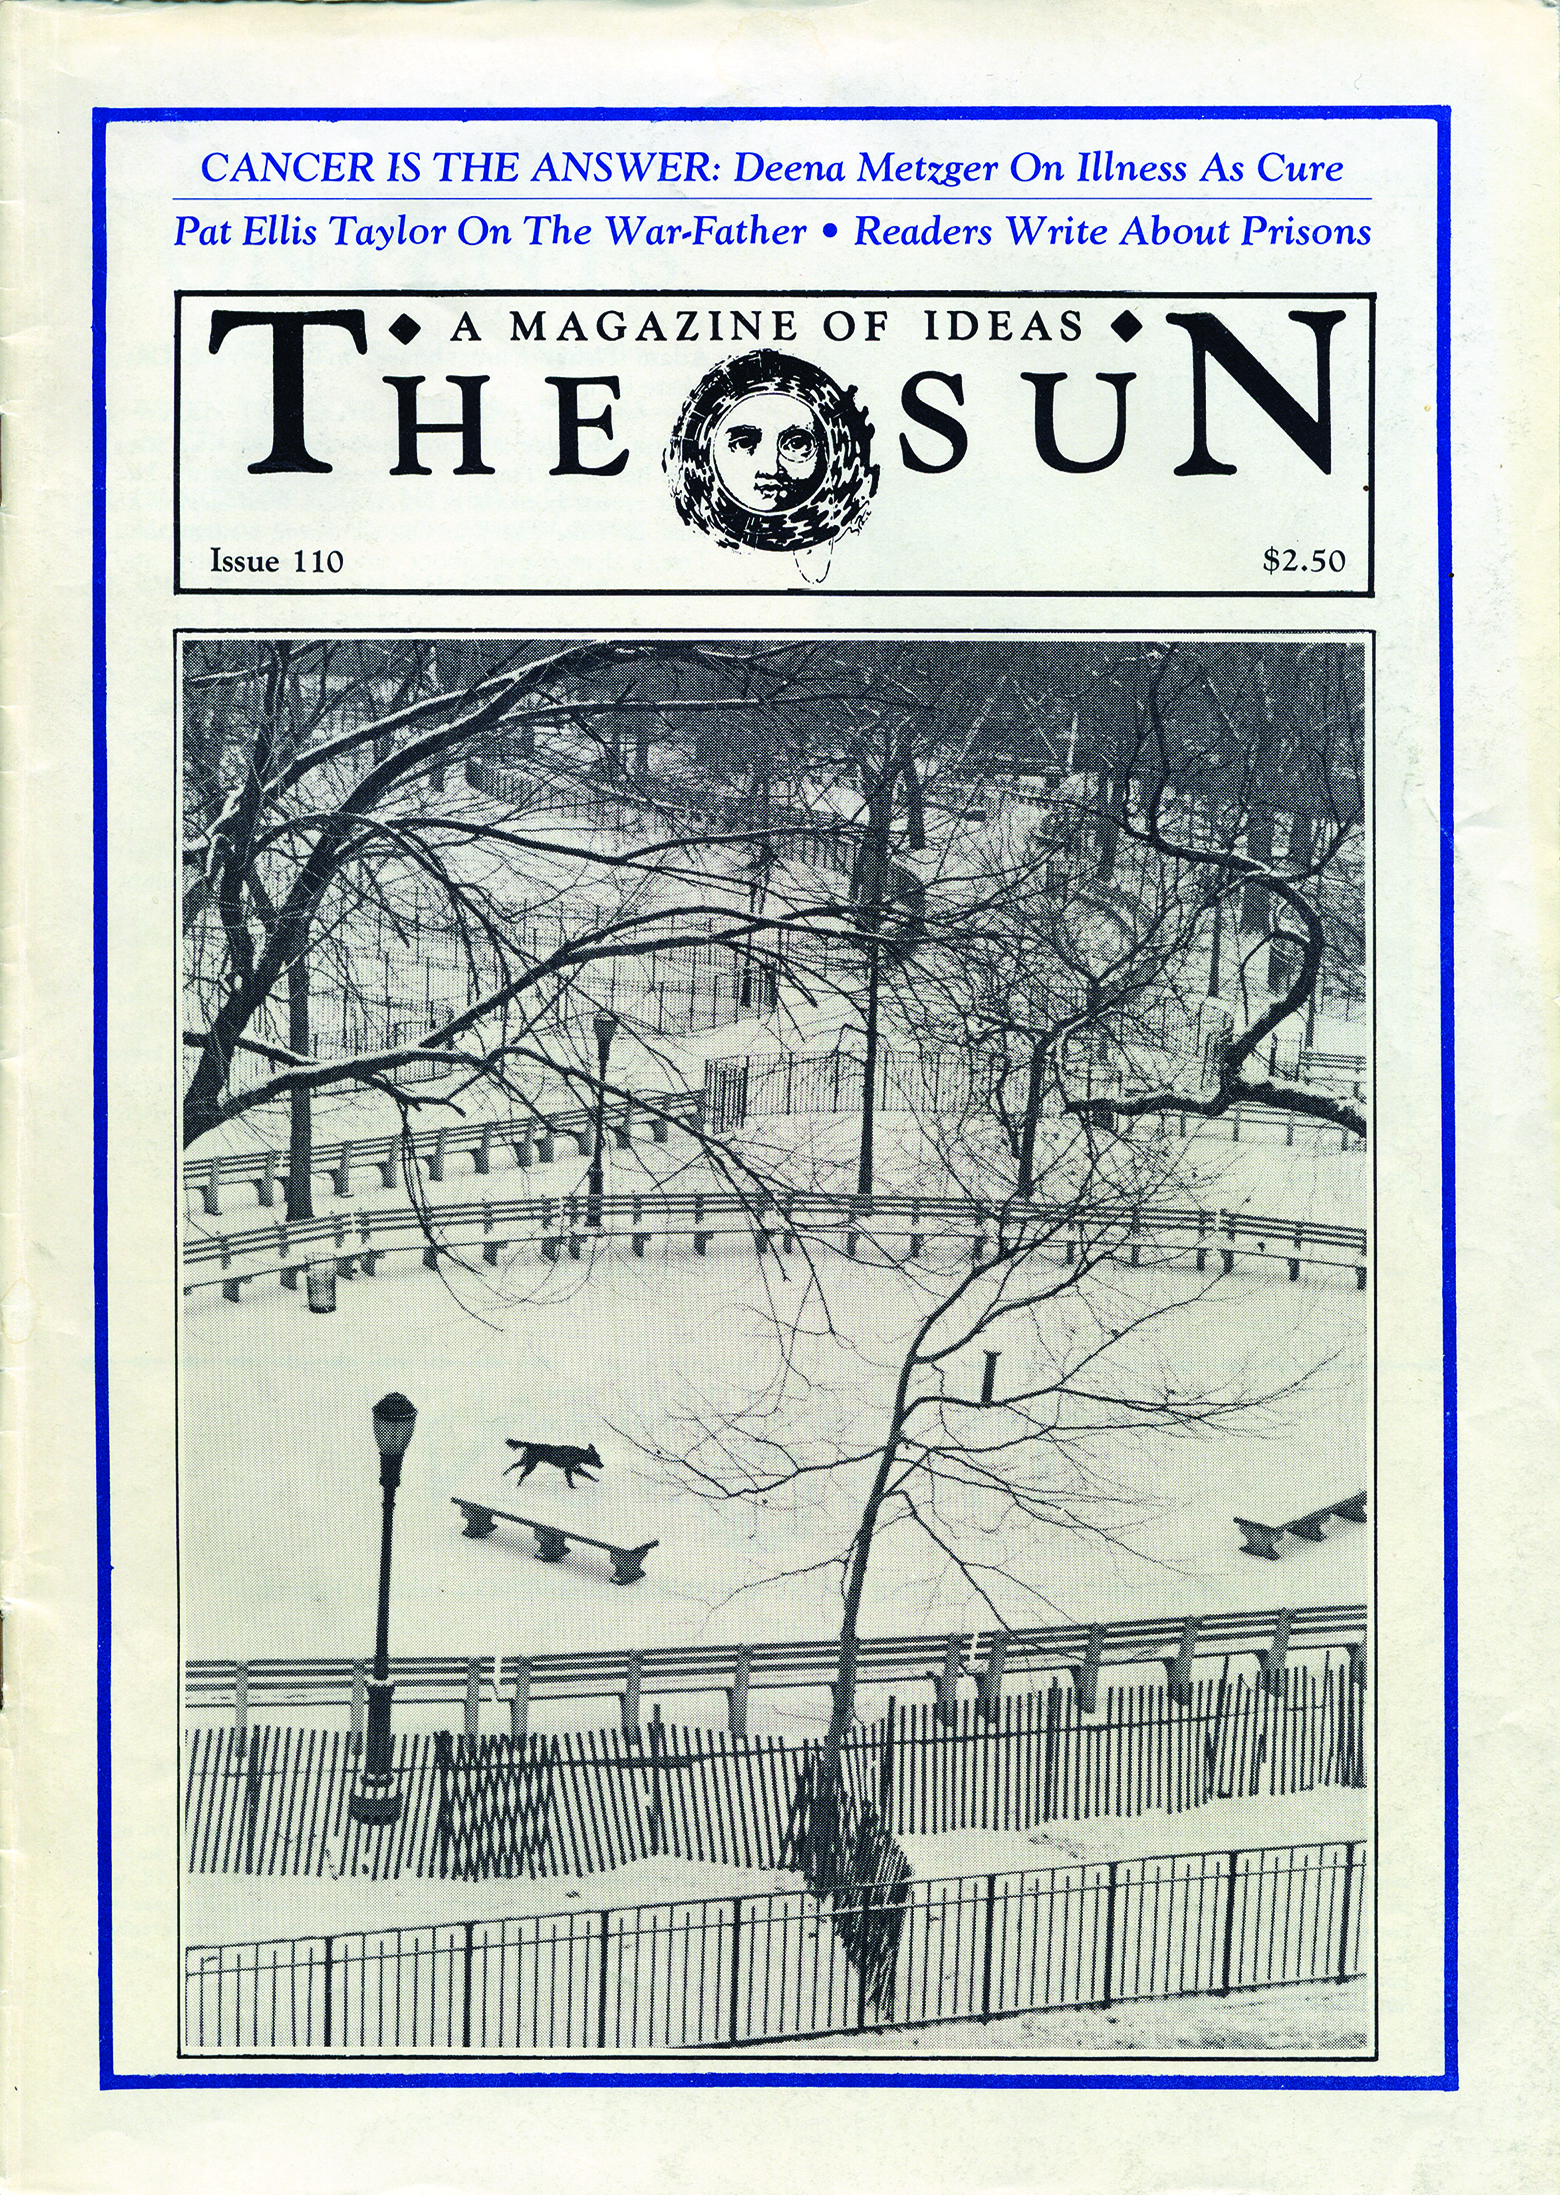 January 1985 cover of The Sun. A marvelous photograph of a snowy park with a lone dog running in the middle of it.